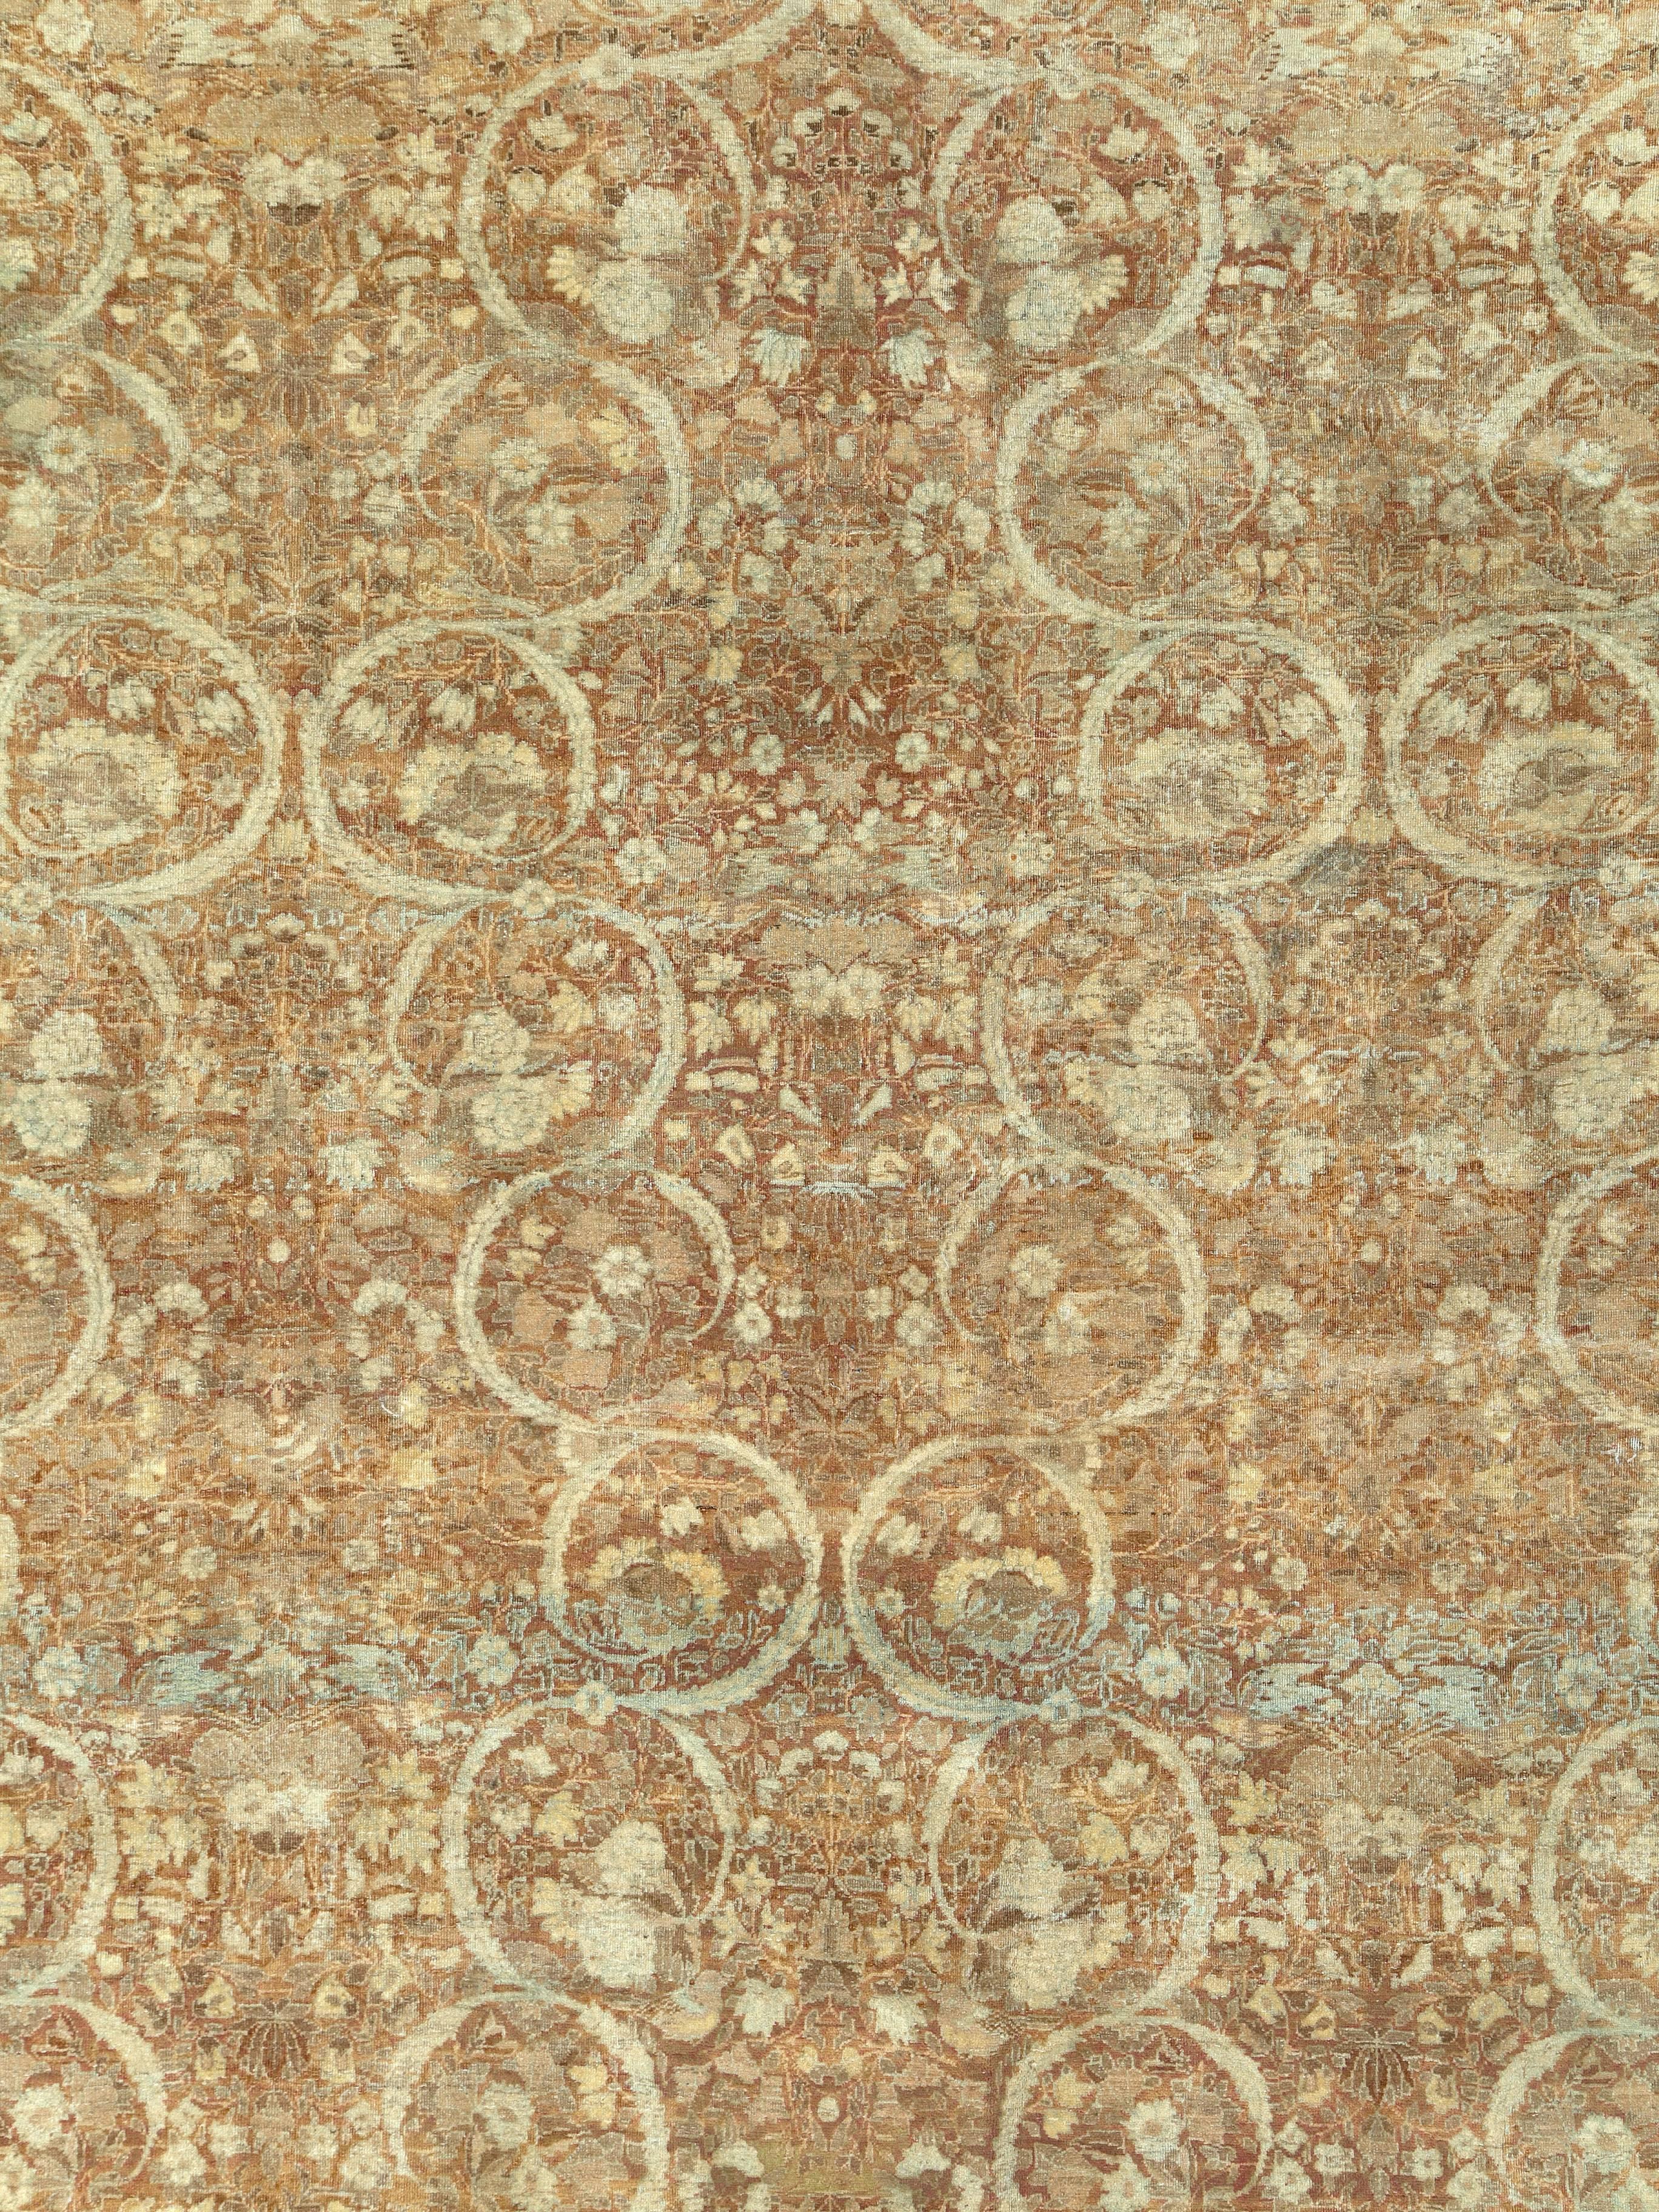 An antique Persian Lavar Kerman carpet from the first quarter of the 20th century.